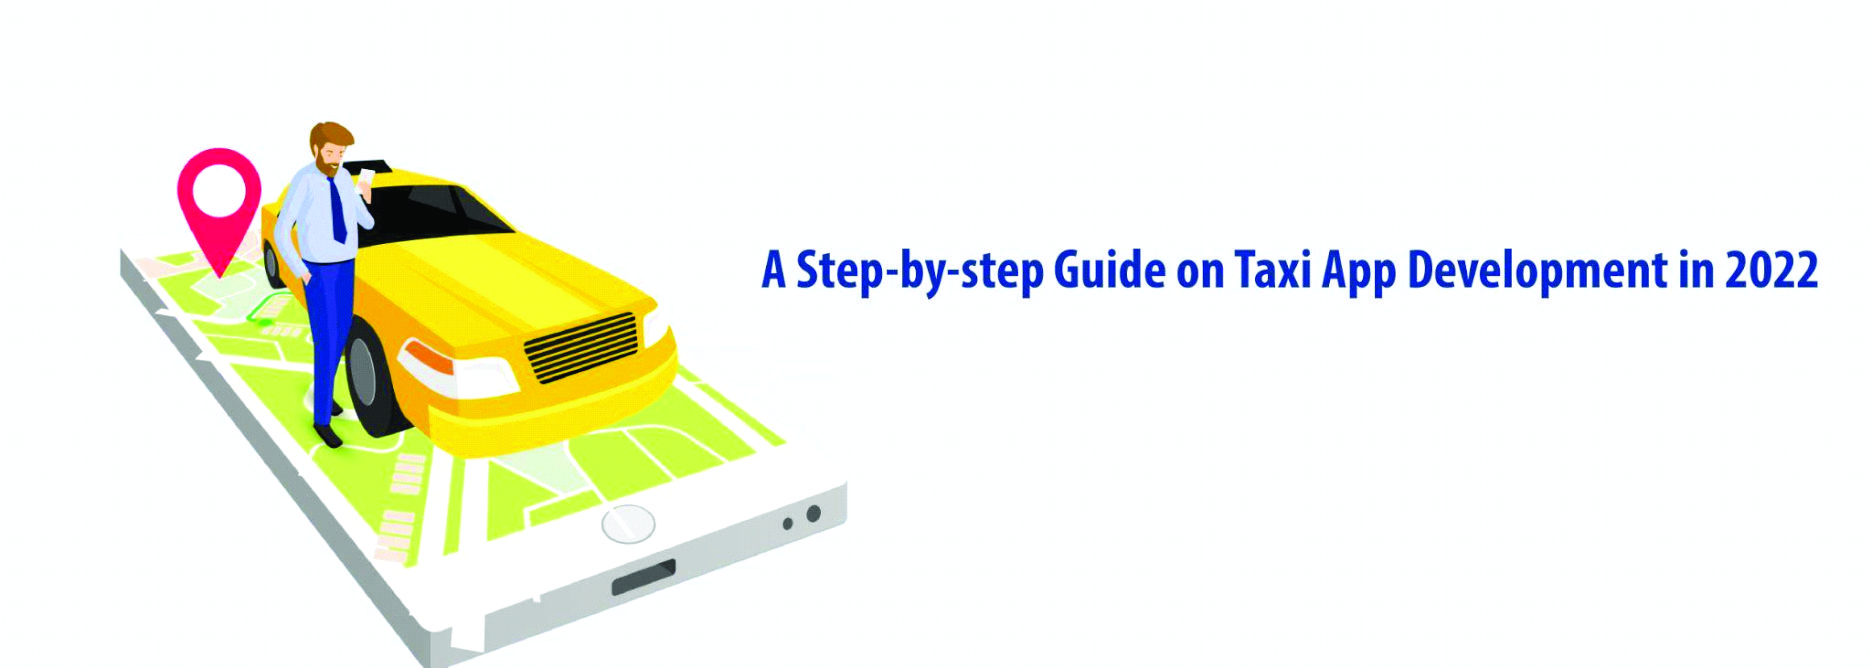 A Step-by-step Guide on Taxi App Development in 2022